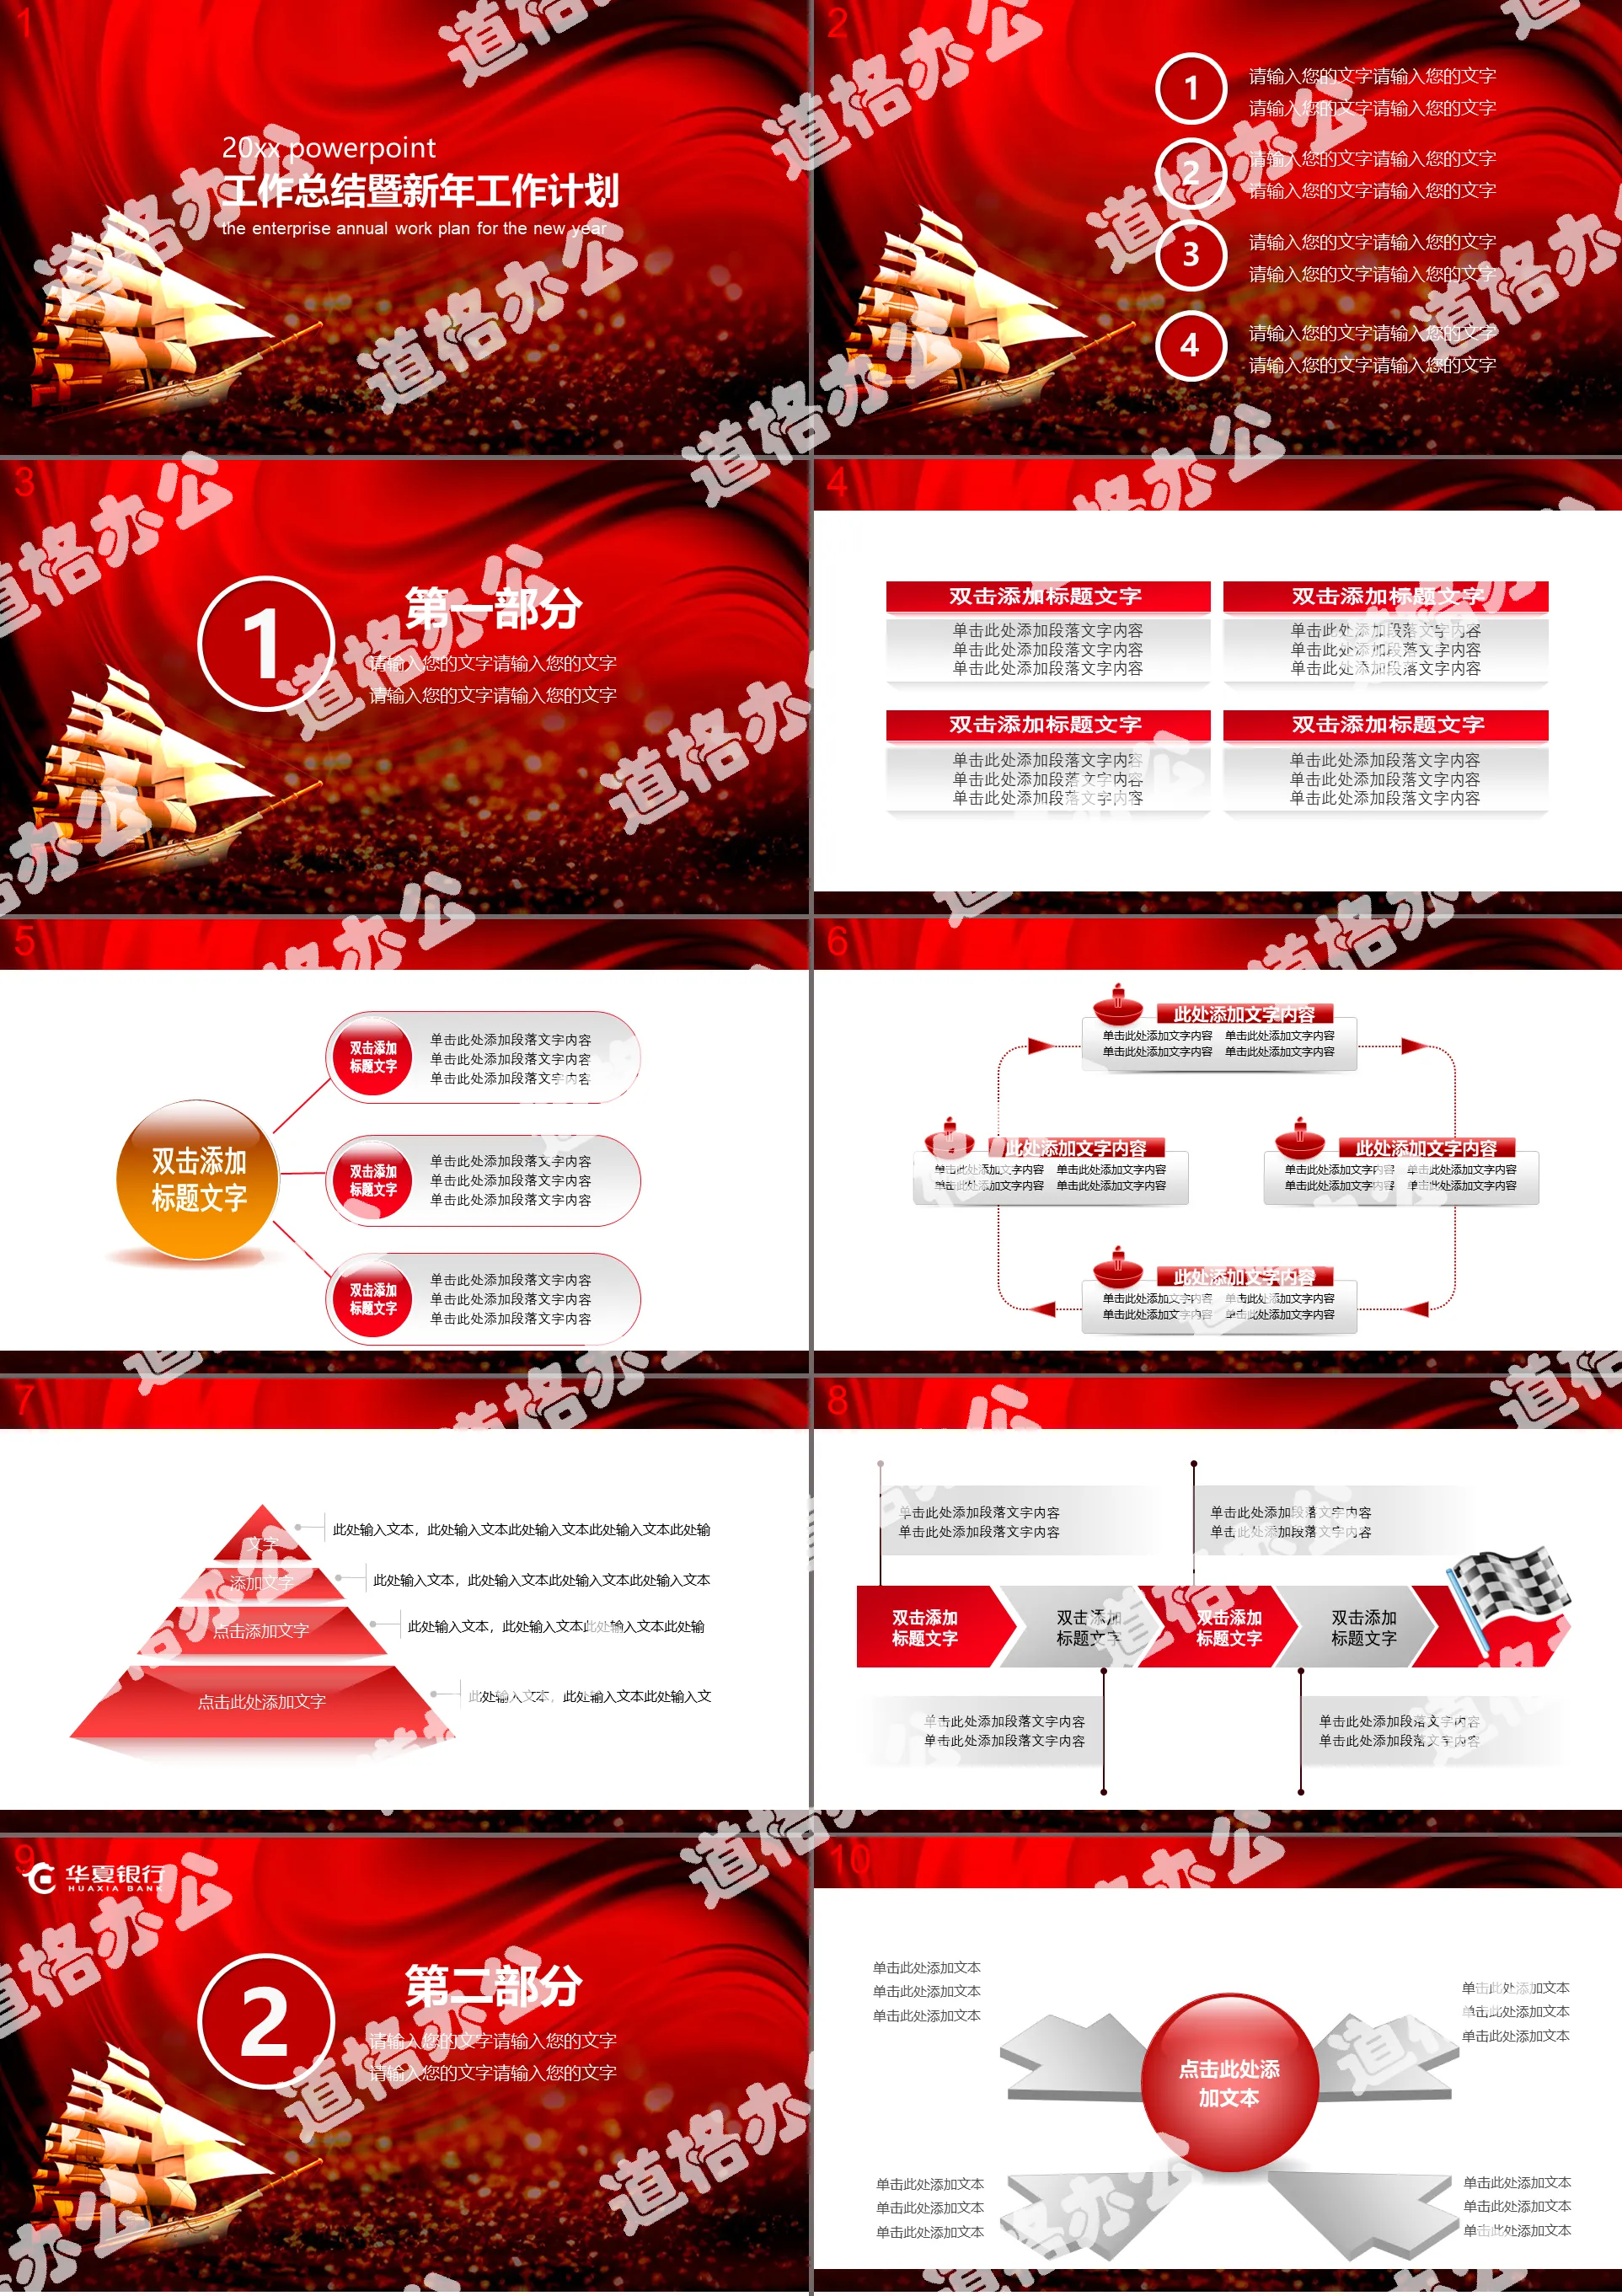 New Year's work plan PPT template with red ribbon sailing background